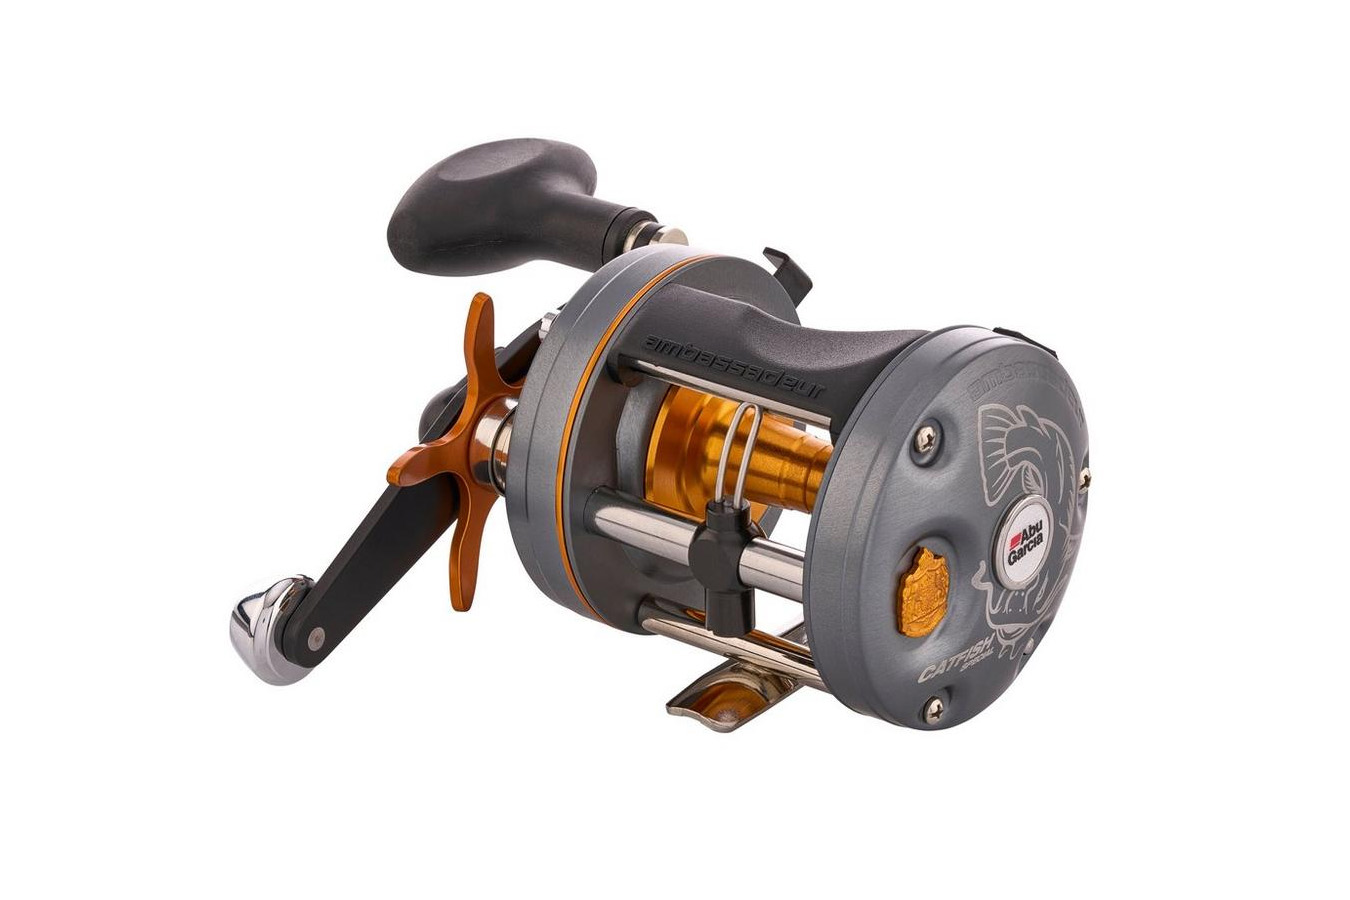 Discount Abu Garcia C3 Catfish Special 7000 4.1:1 Round Reel for Sale, Online Fishing Reels Store